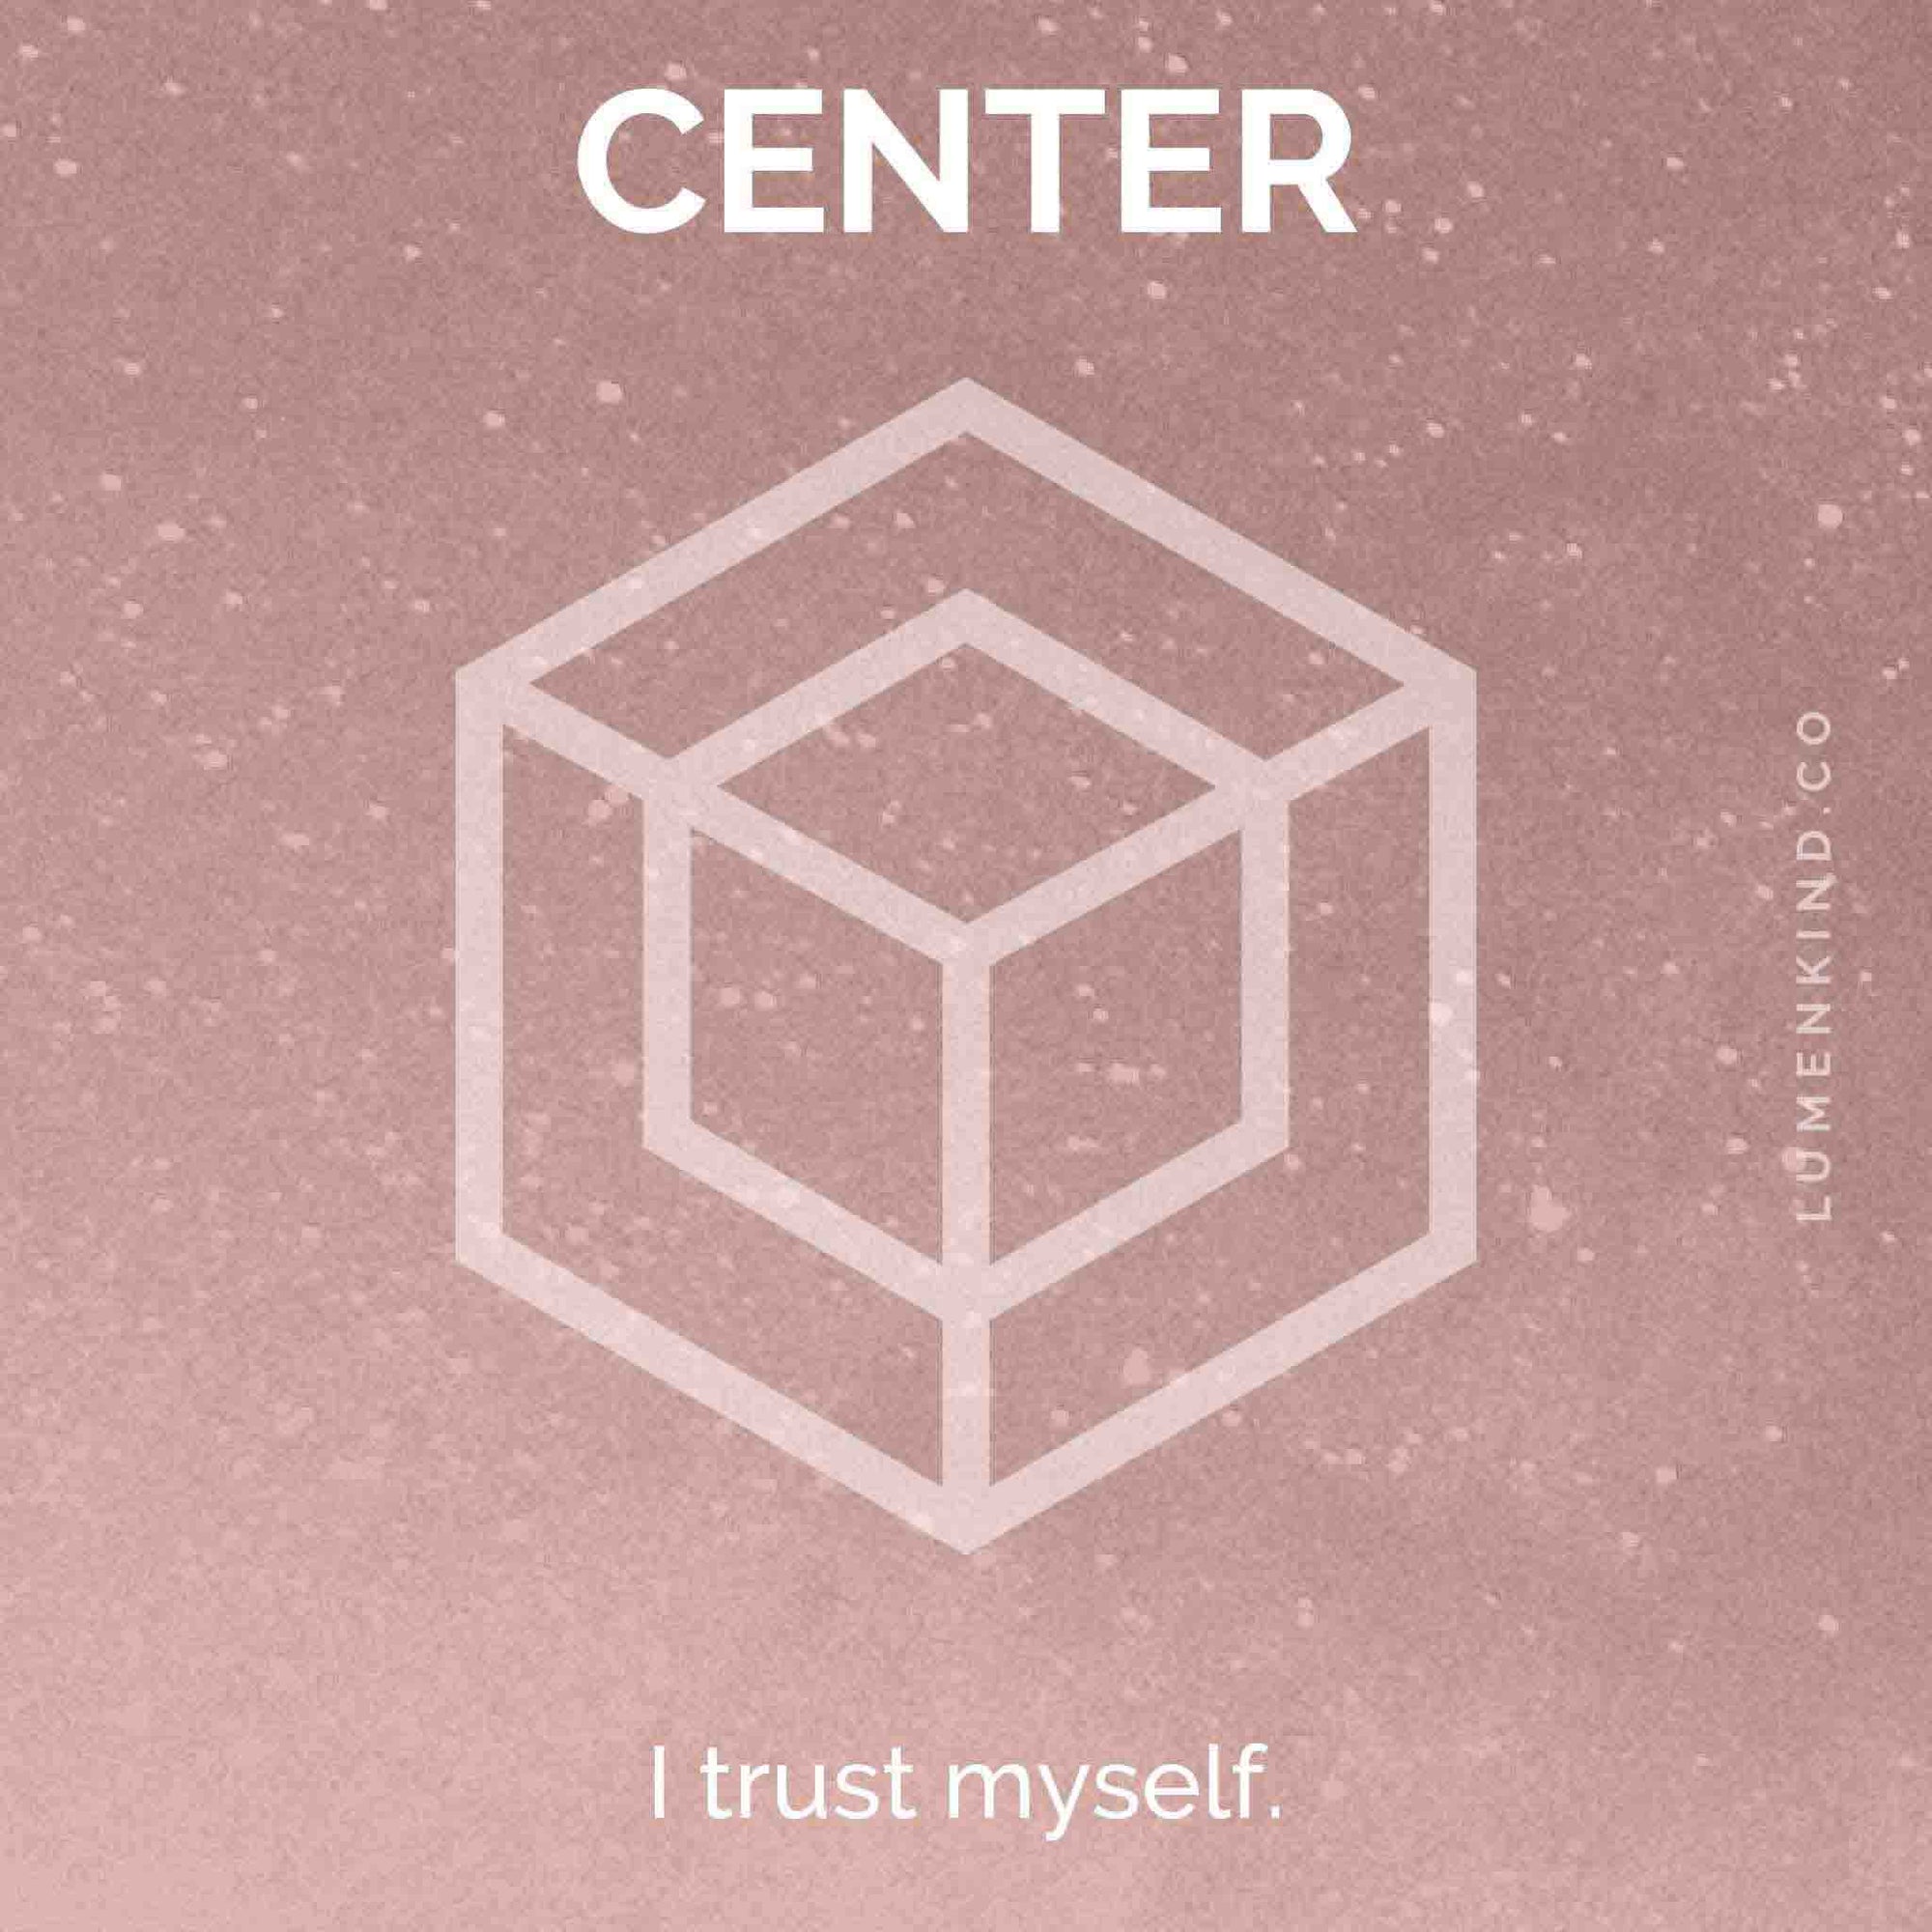 The suggested intention is CENTER. I trust myself.